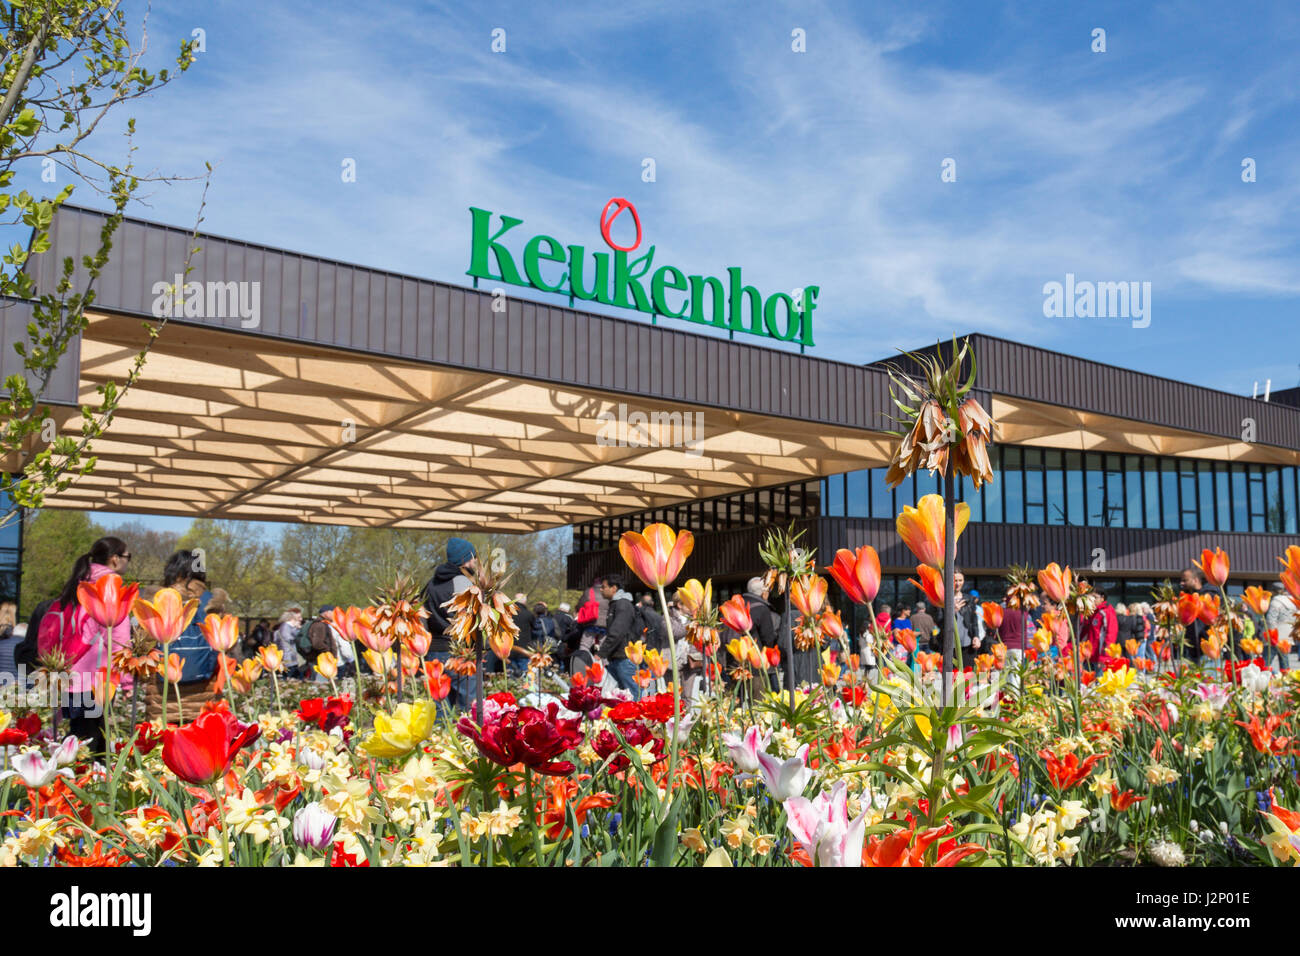 Lisse, The Netherlands. 30th Apr, 2017. The new entrance building of the keukenhof spring garden was opened in March 2017. The famous garden has many flowers. Over one million visitors every year. Credit: Marcel van den Bos/Alamy Live News Stock Photo